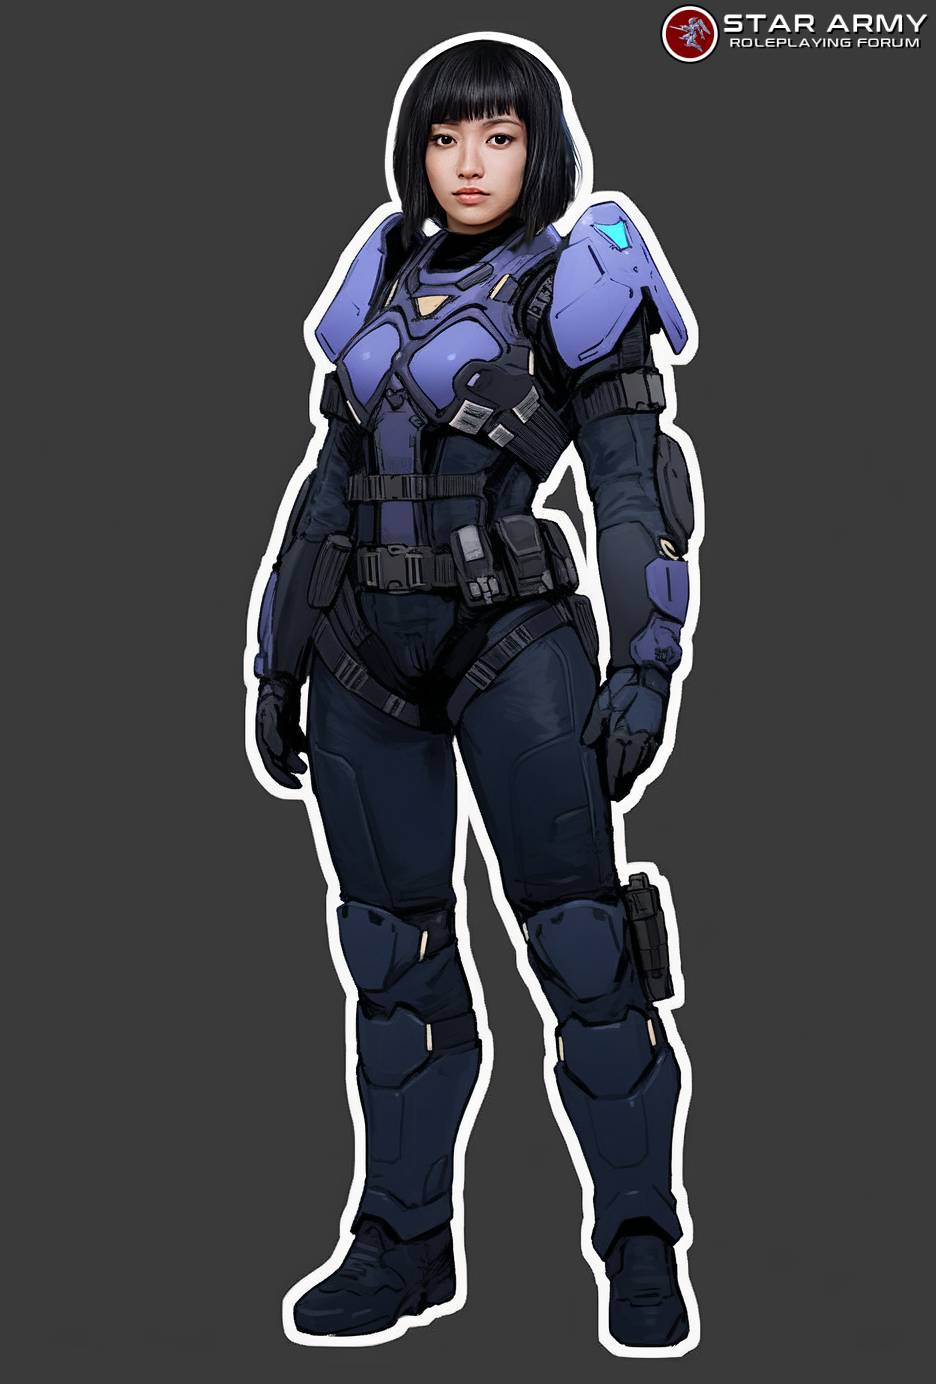 2023 Aoba Akasa in Infantry Concept Uniform 2  by Wes